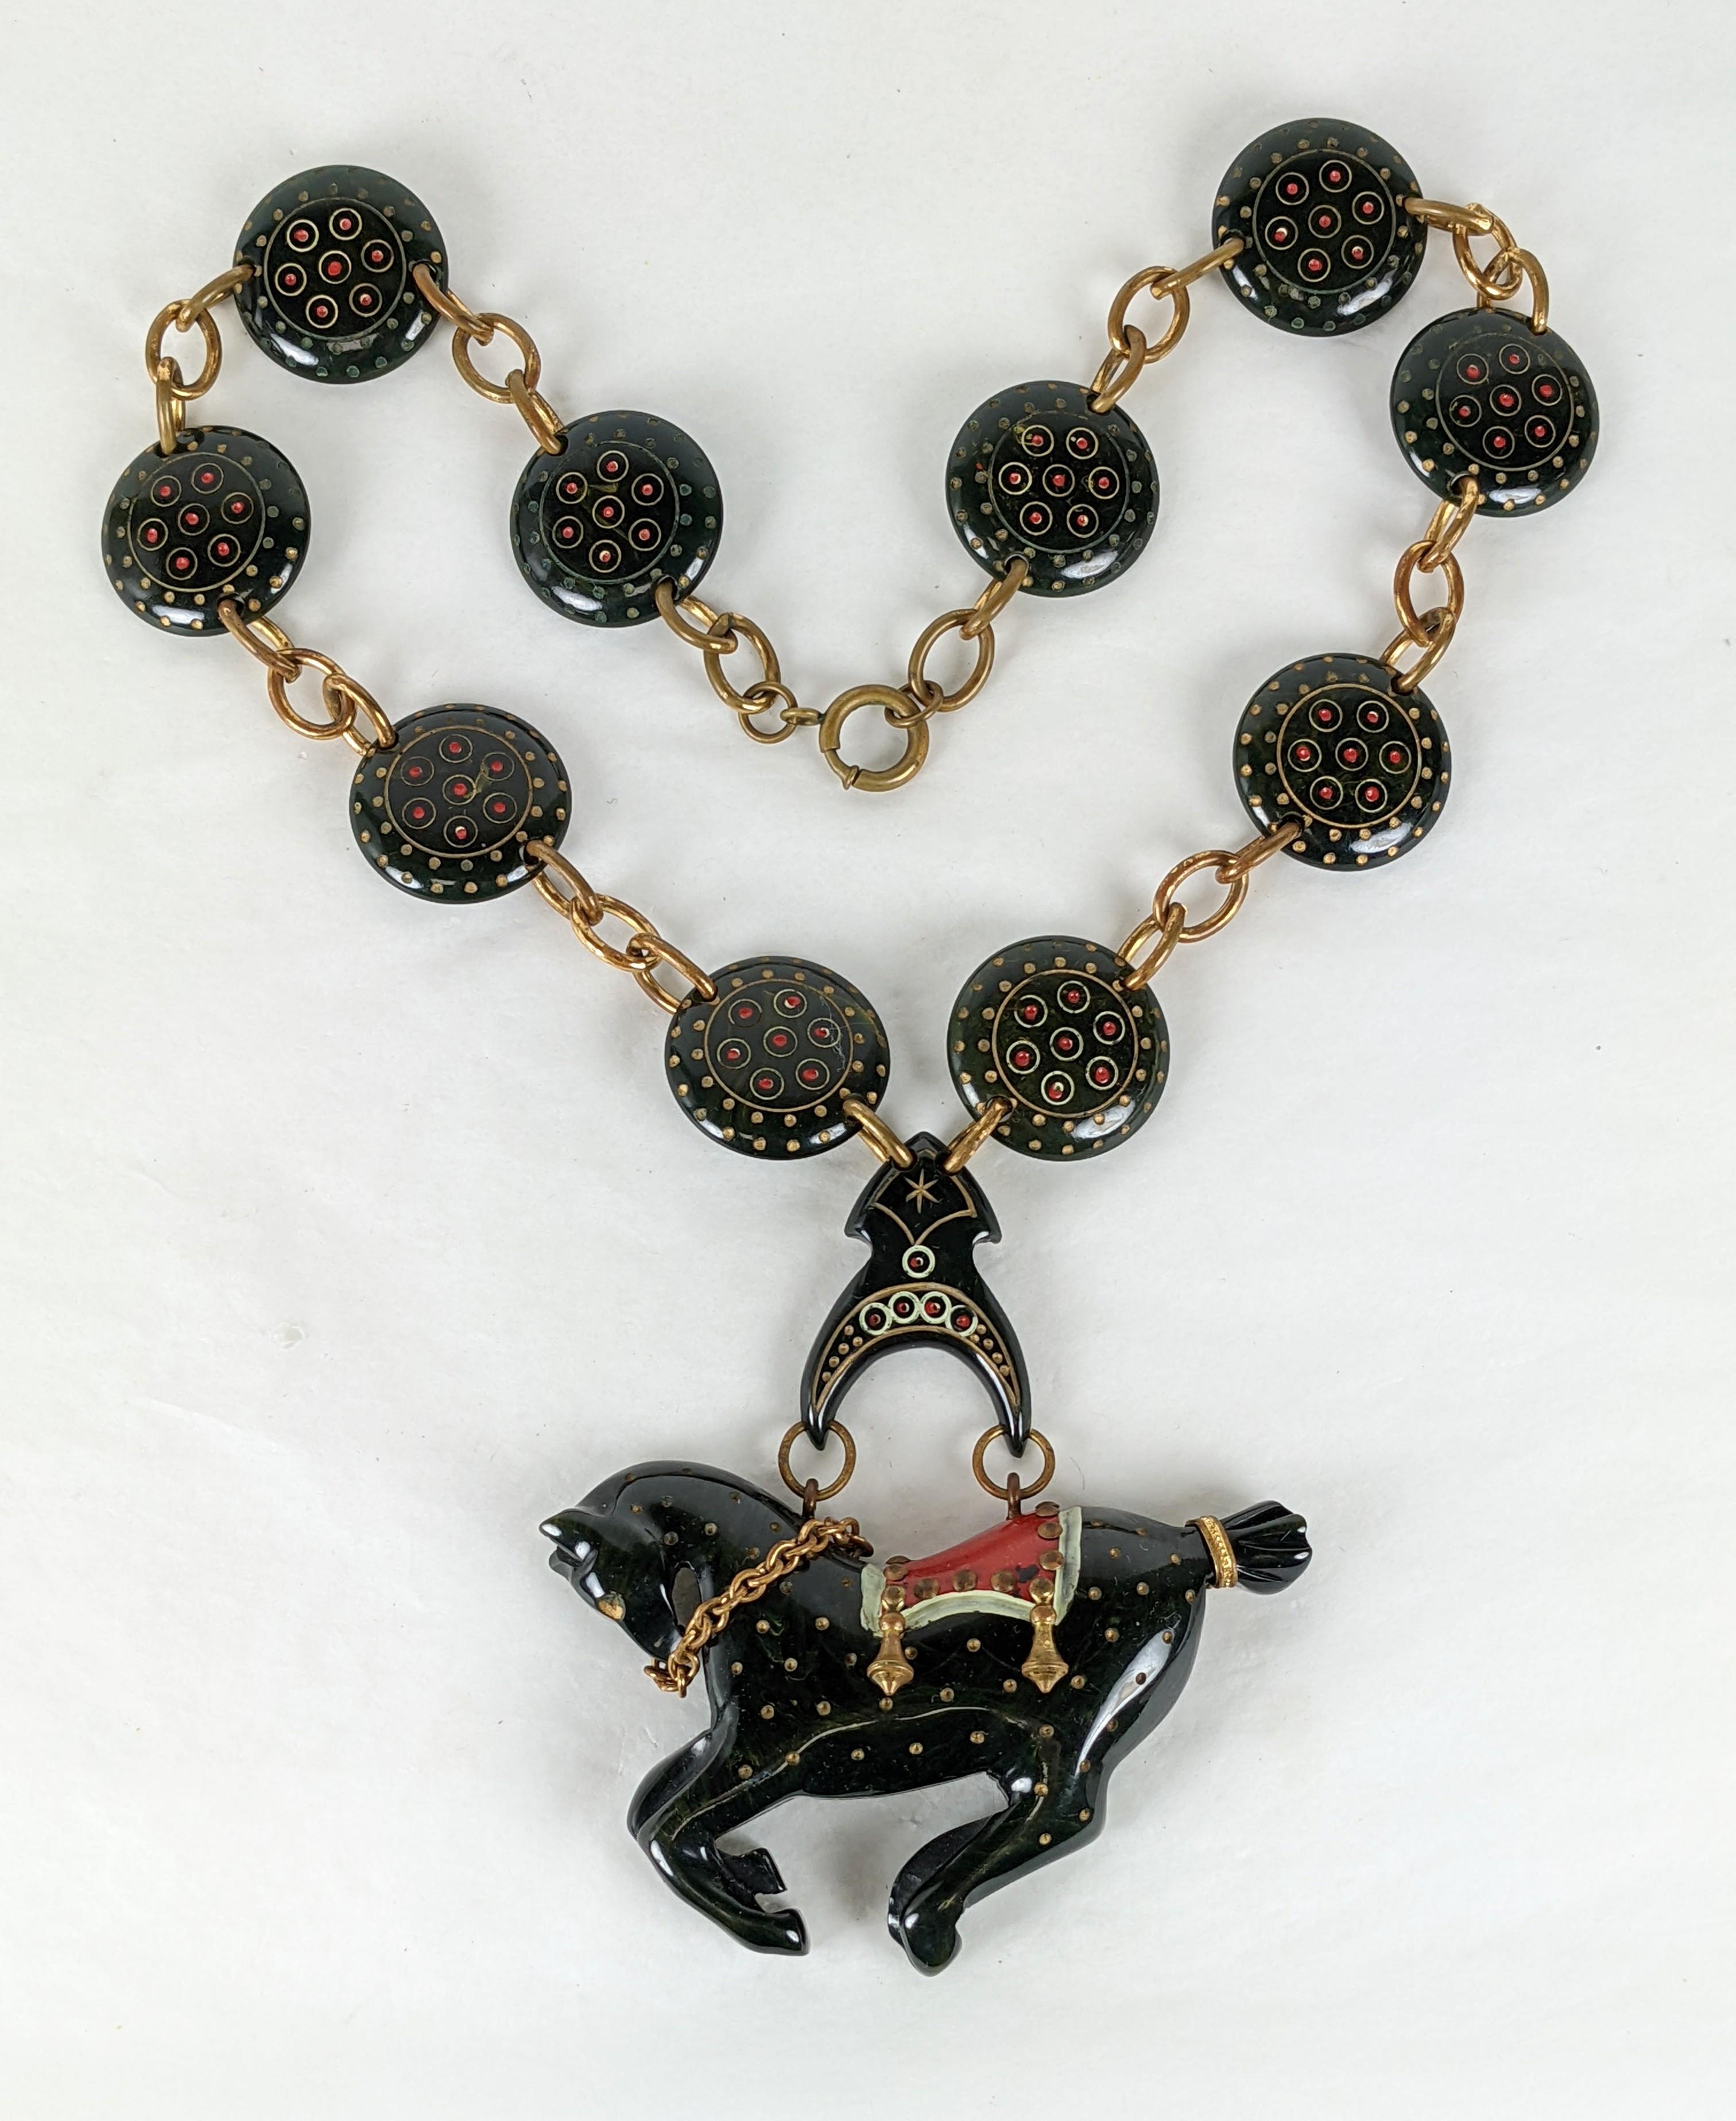 Incredibly Rare Bakelite Carousel Horse Necklace from the 1930's Art Deco period. On occasion the carousel horse motif is seen on a cuff but this necklace is possibly a one of a kind piece of American Folk Art. The scale is incredible as is the